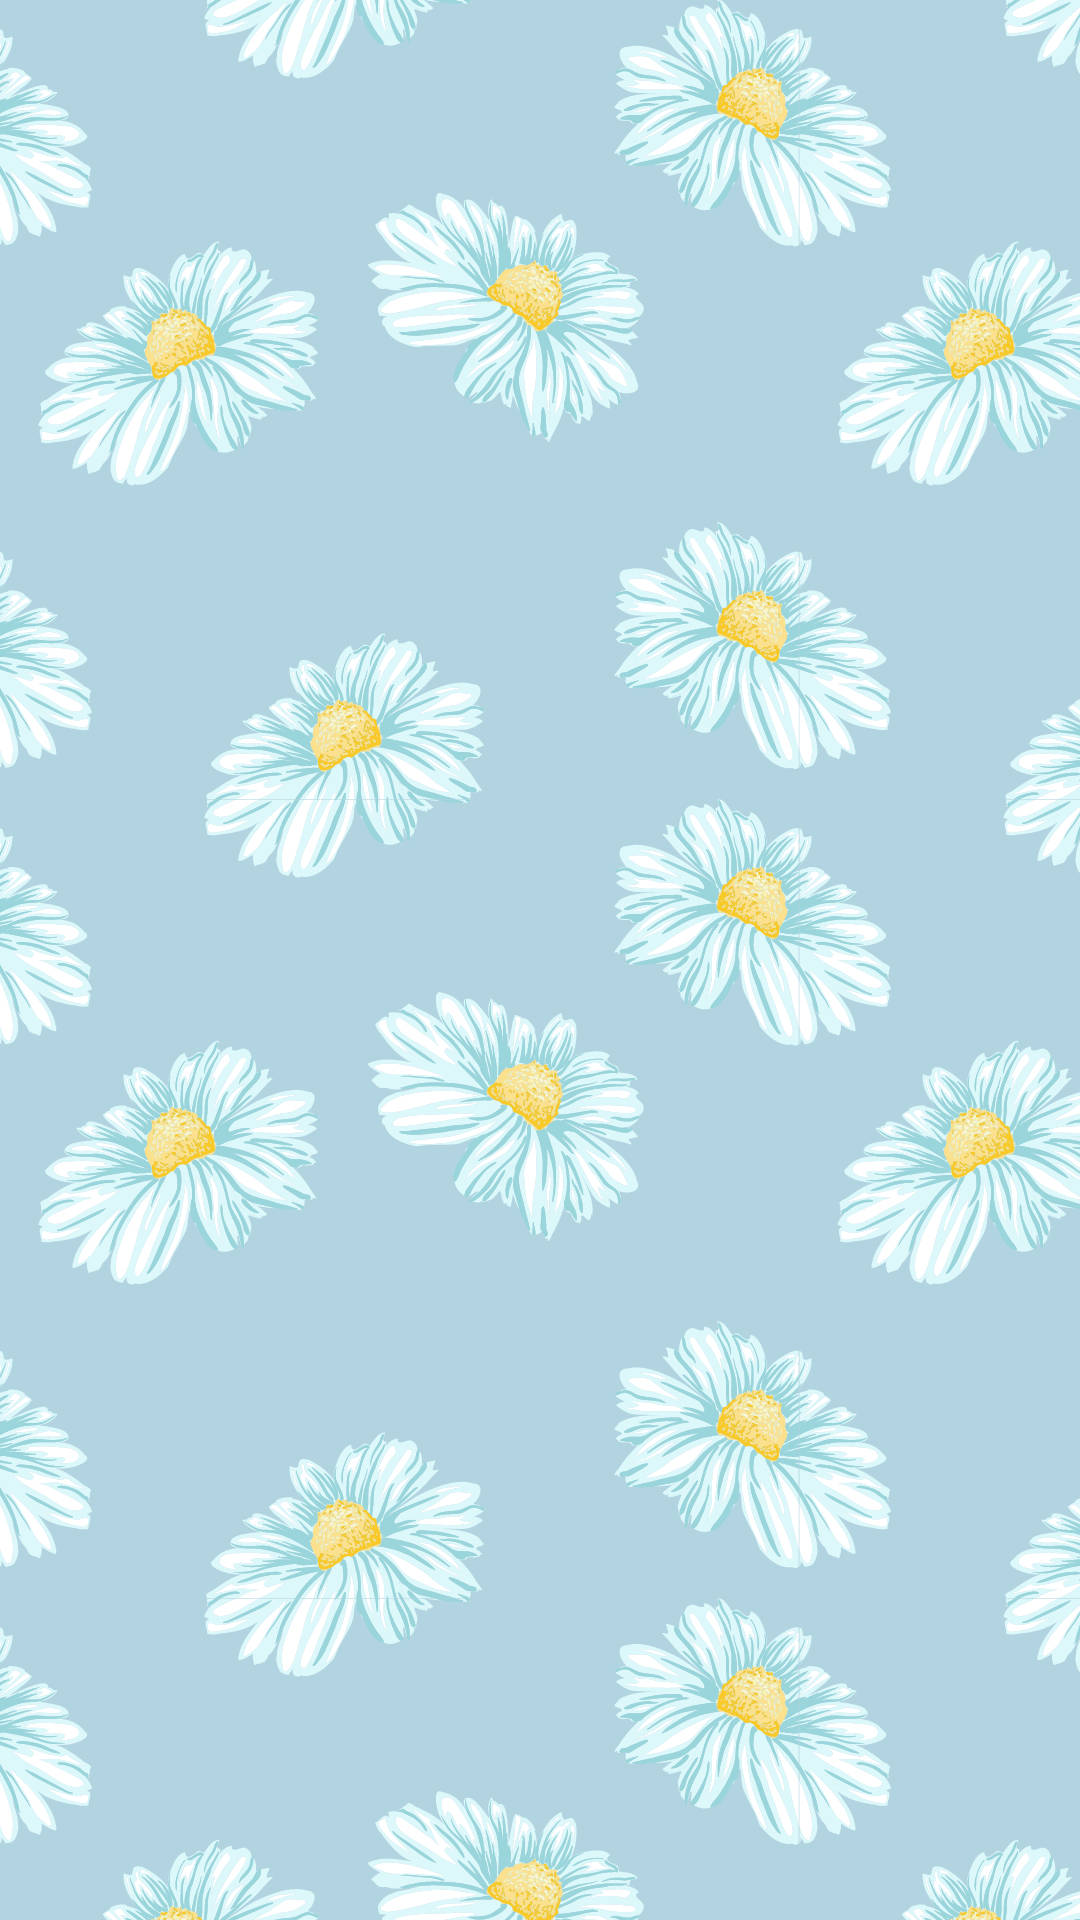 Download Pretty Aesthetic Daisies Wallpaper